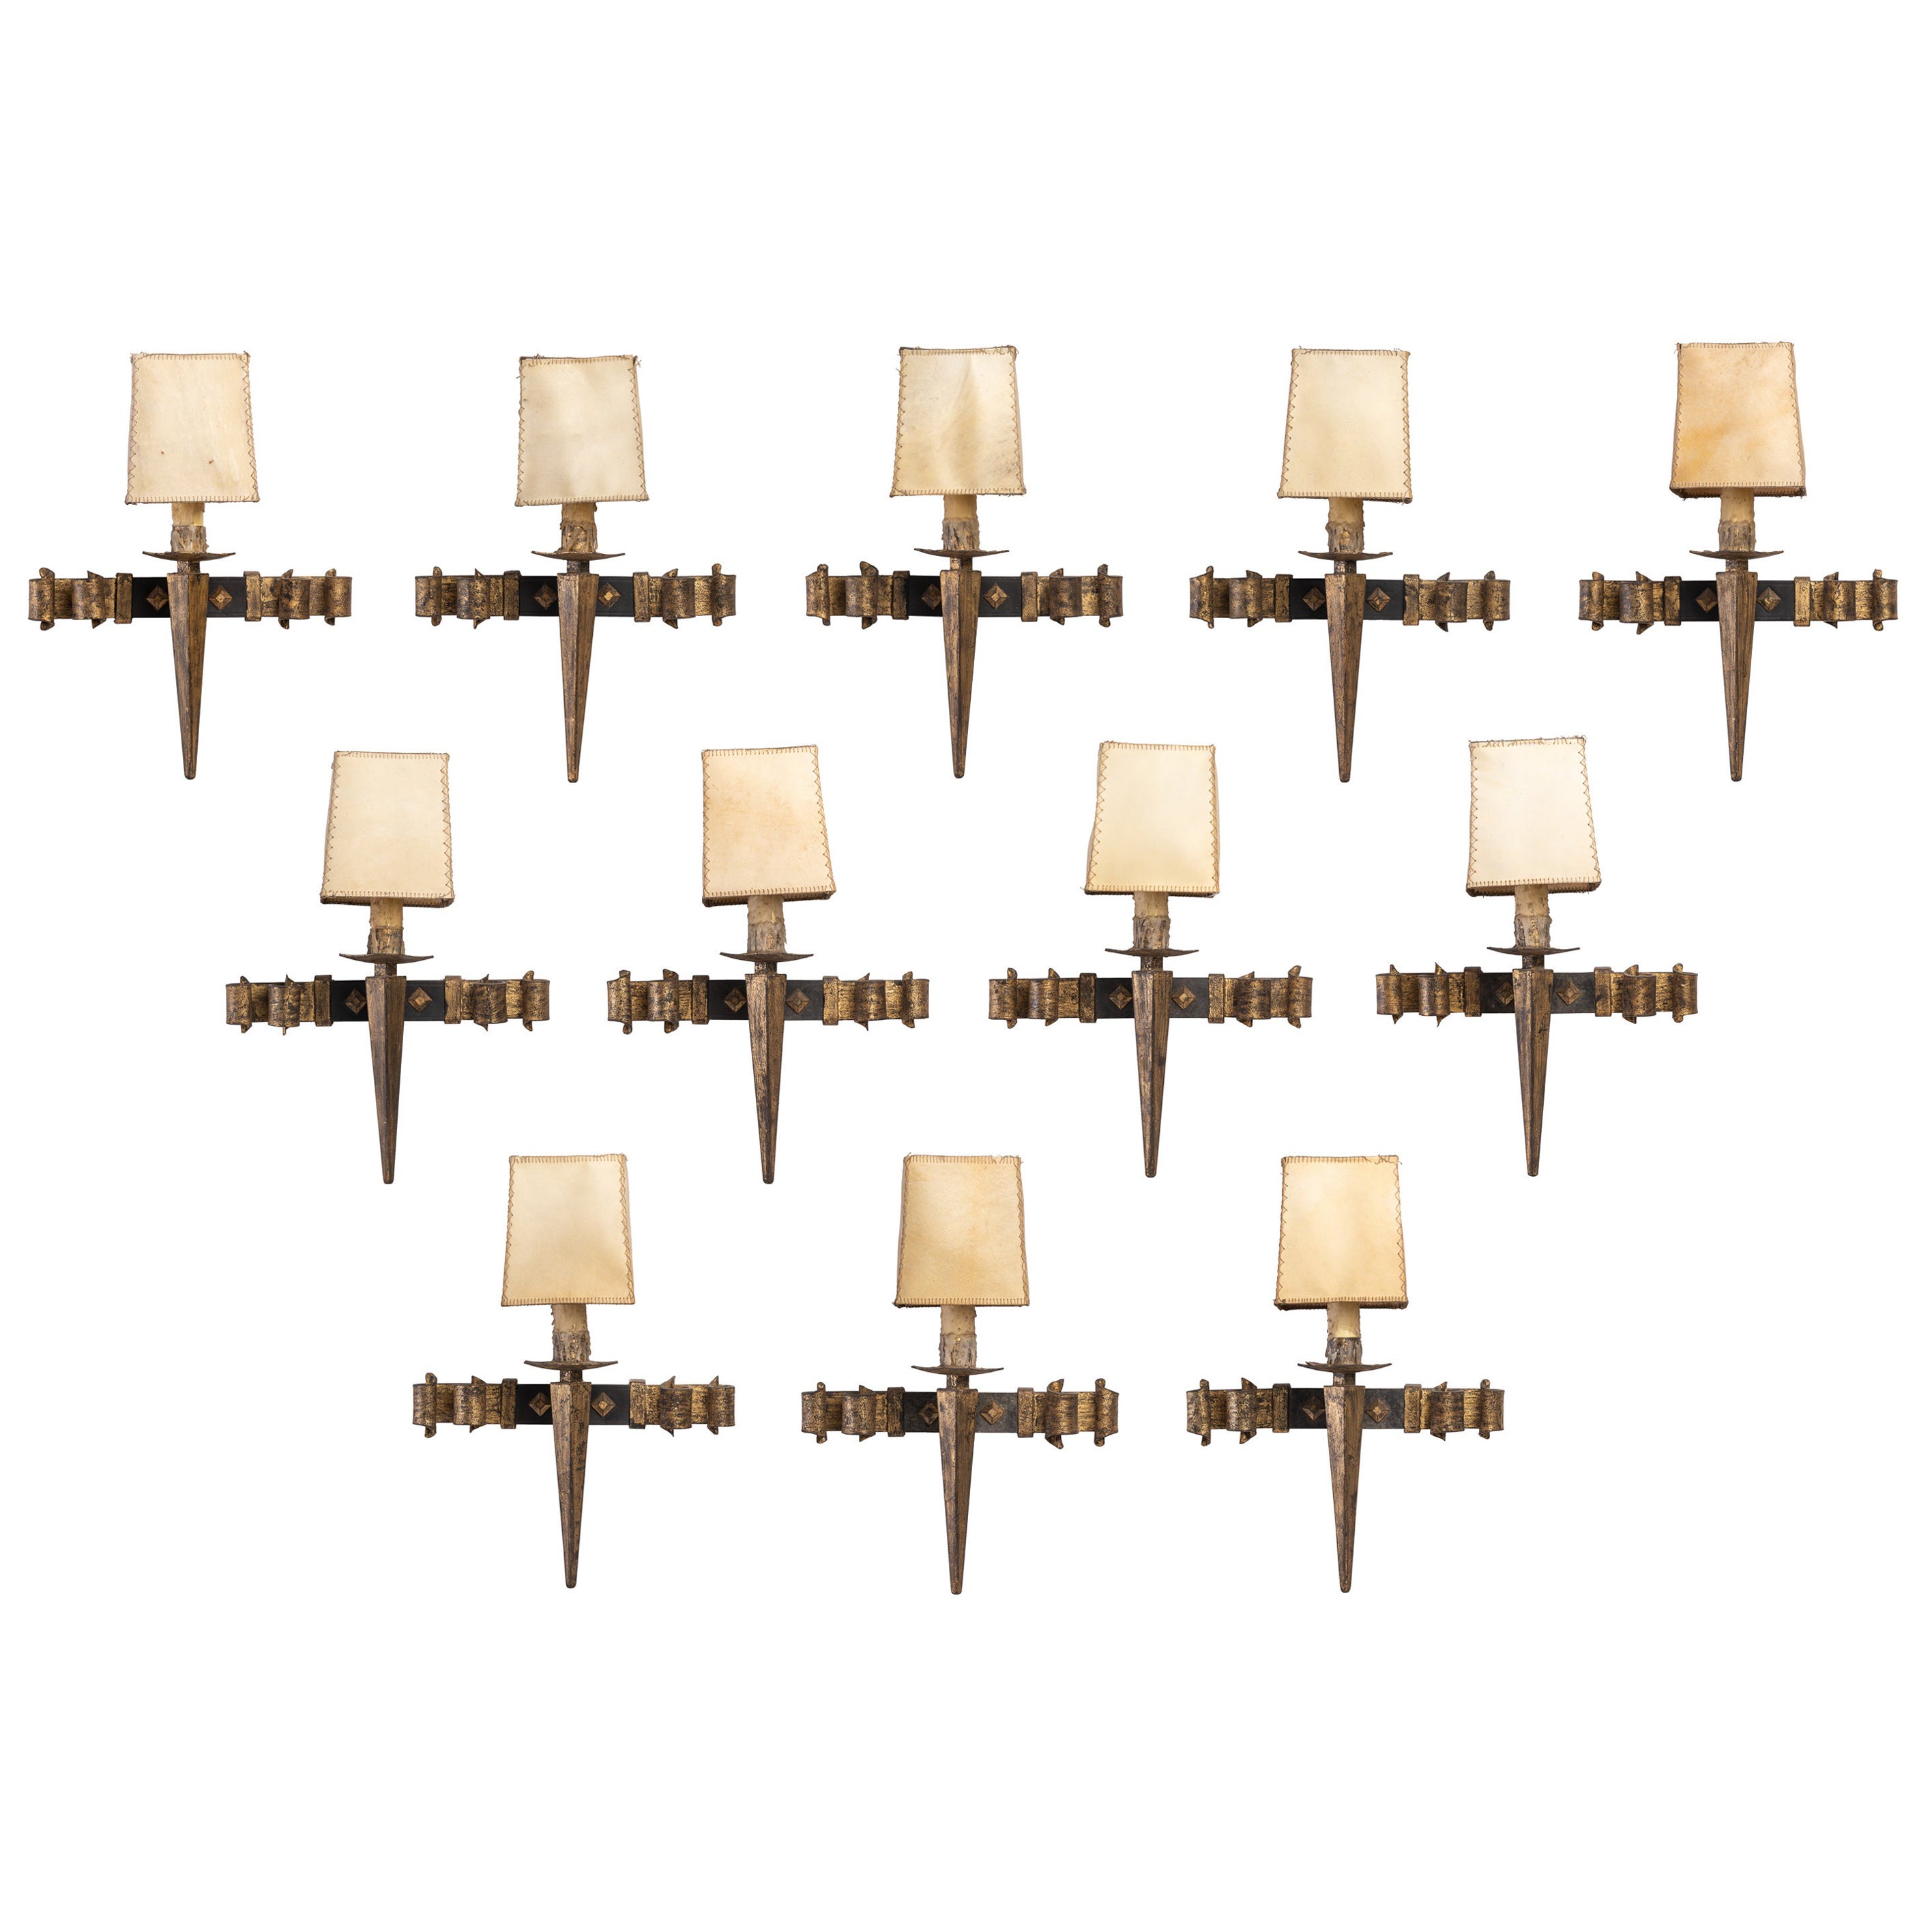 Set of 12 Neo-Gothic Medieval Style Iron Wall Sconces with Parchment Shades